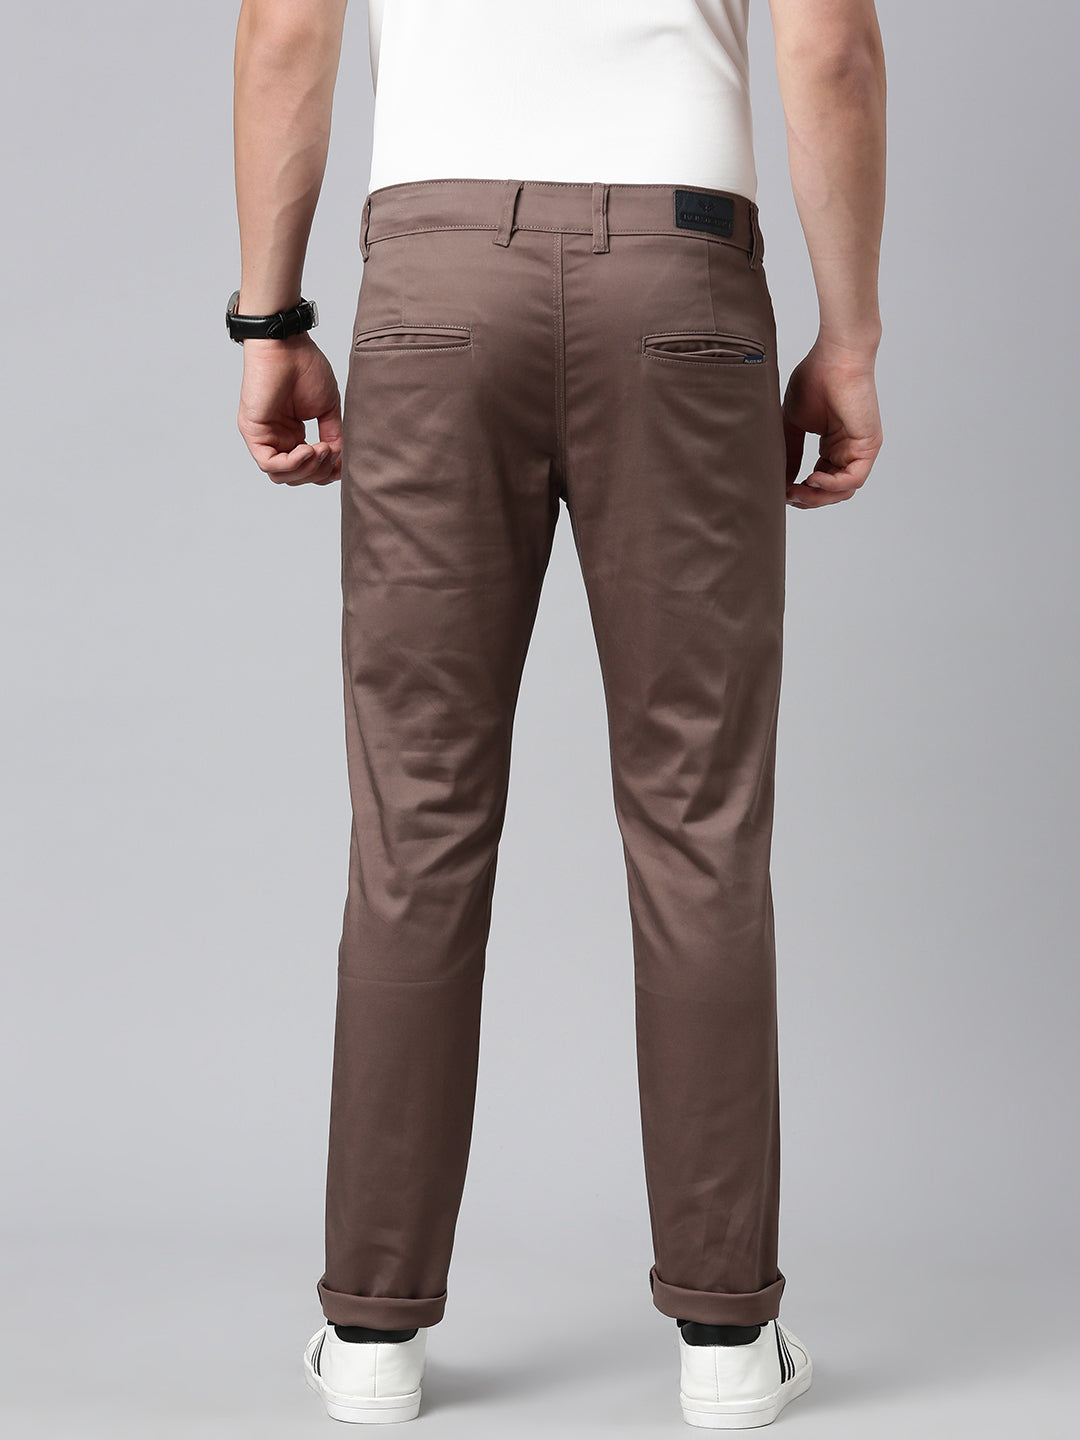 Majestic Man Regular Fit Satin Finish Cotton Casual Solid Chinos Trouser - Metal Brown